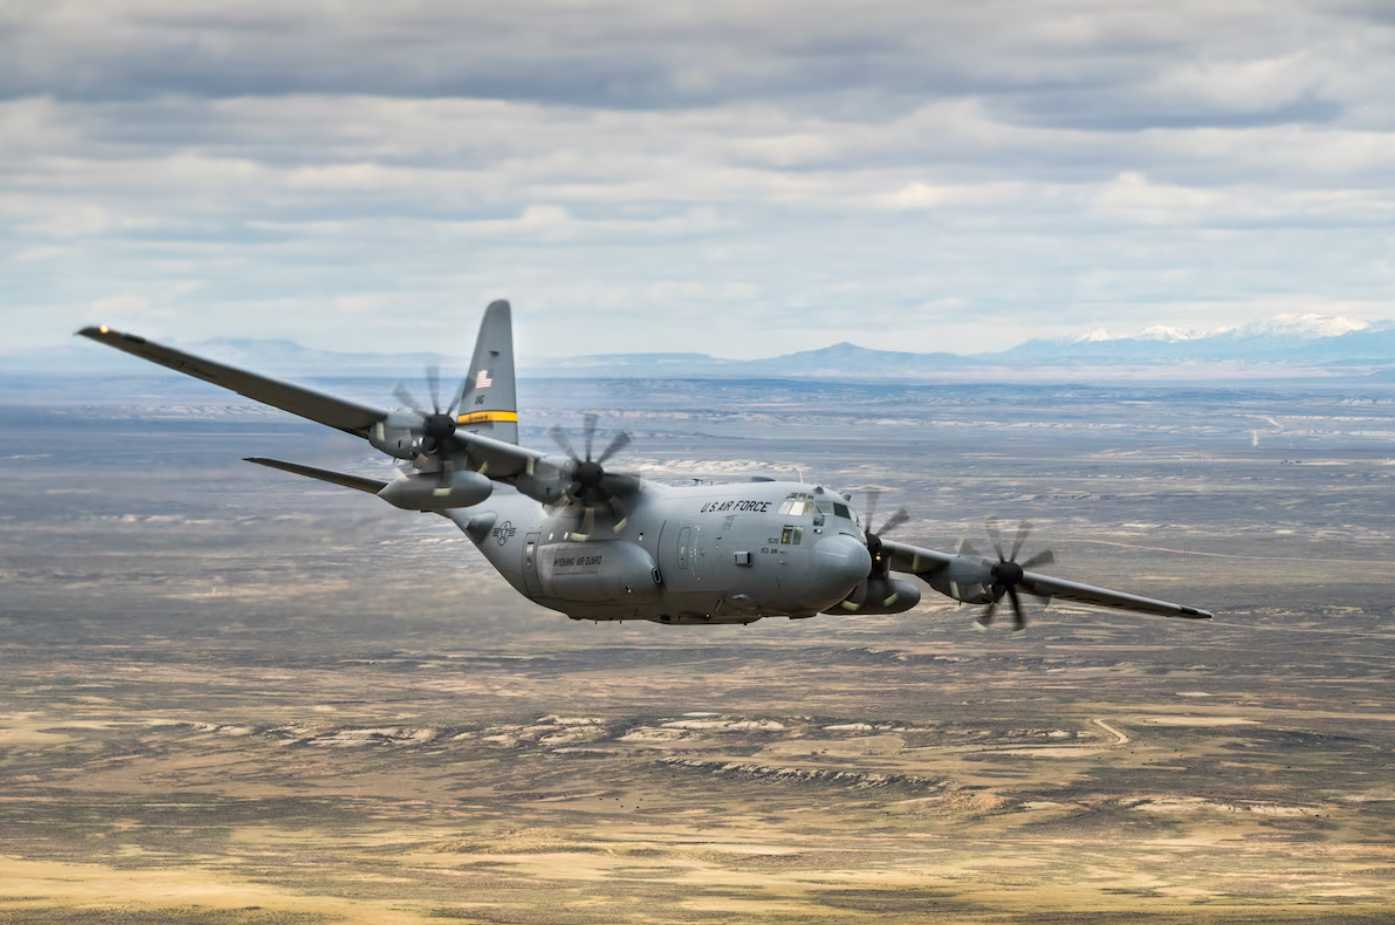 A C-130 Hercules flies over a sandy plains. The plane is colored gray, with a yellow stripe on its tail. It has "US AIR FORCE" painted on its side in black, as well as "WYOMING AIR GUARD", below its wing. The background is the landscape; a wide stretch of land occupies most of the space, with green grass and yellow-white sands scattered evenly. Over the horizon, a mountain range is seen. Some of its peaks are snowy and white. The sky above is full of thin, long clouds.